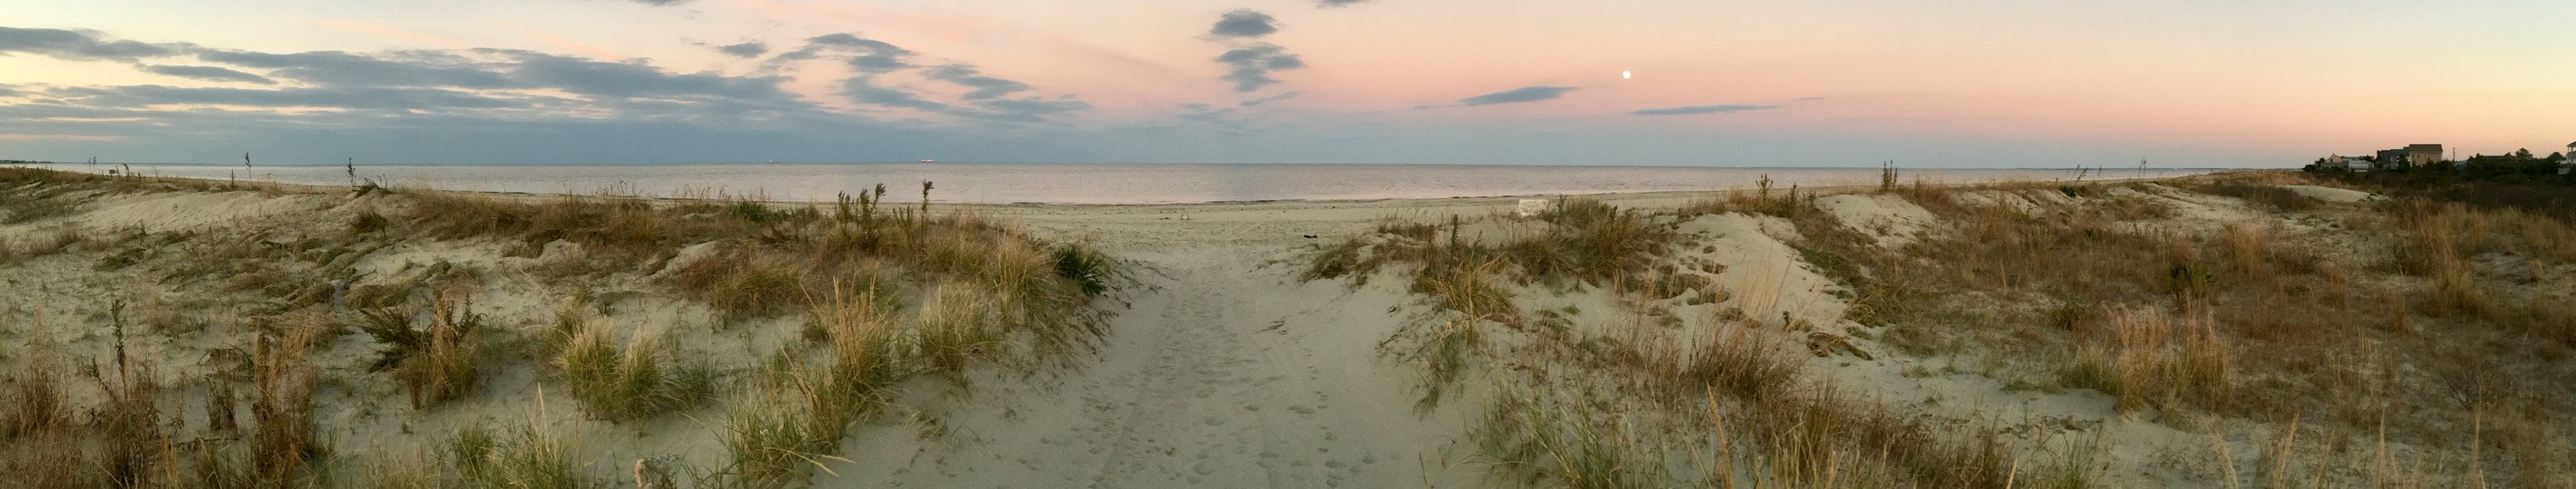 beach at sunset in delaware